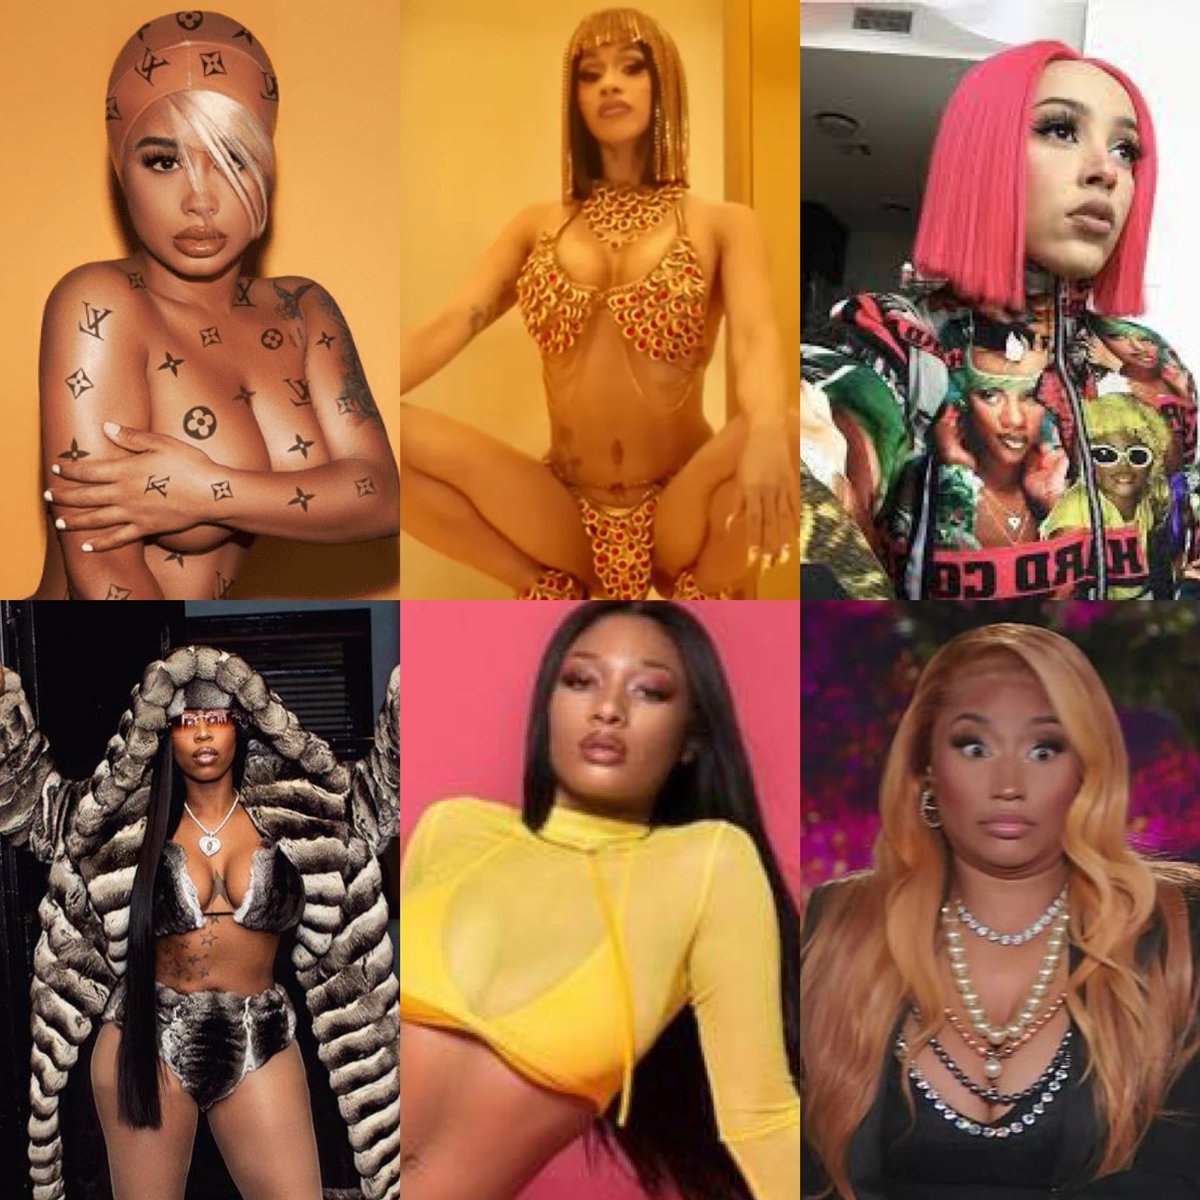 My thing is this, you can love who you rep but understand Lil' Kim is ...